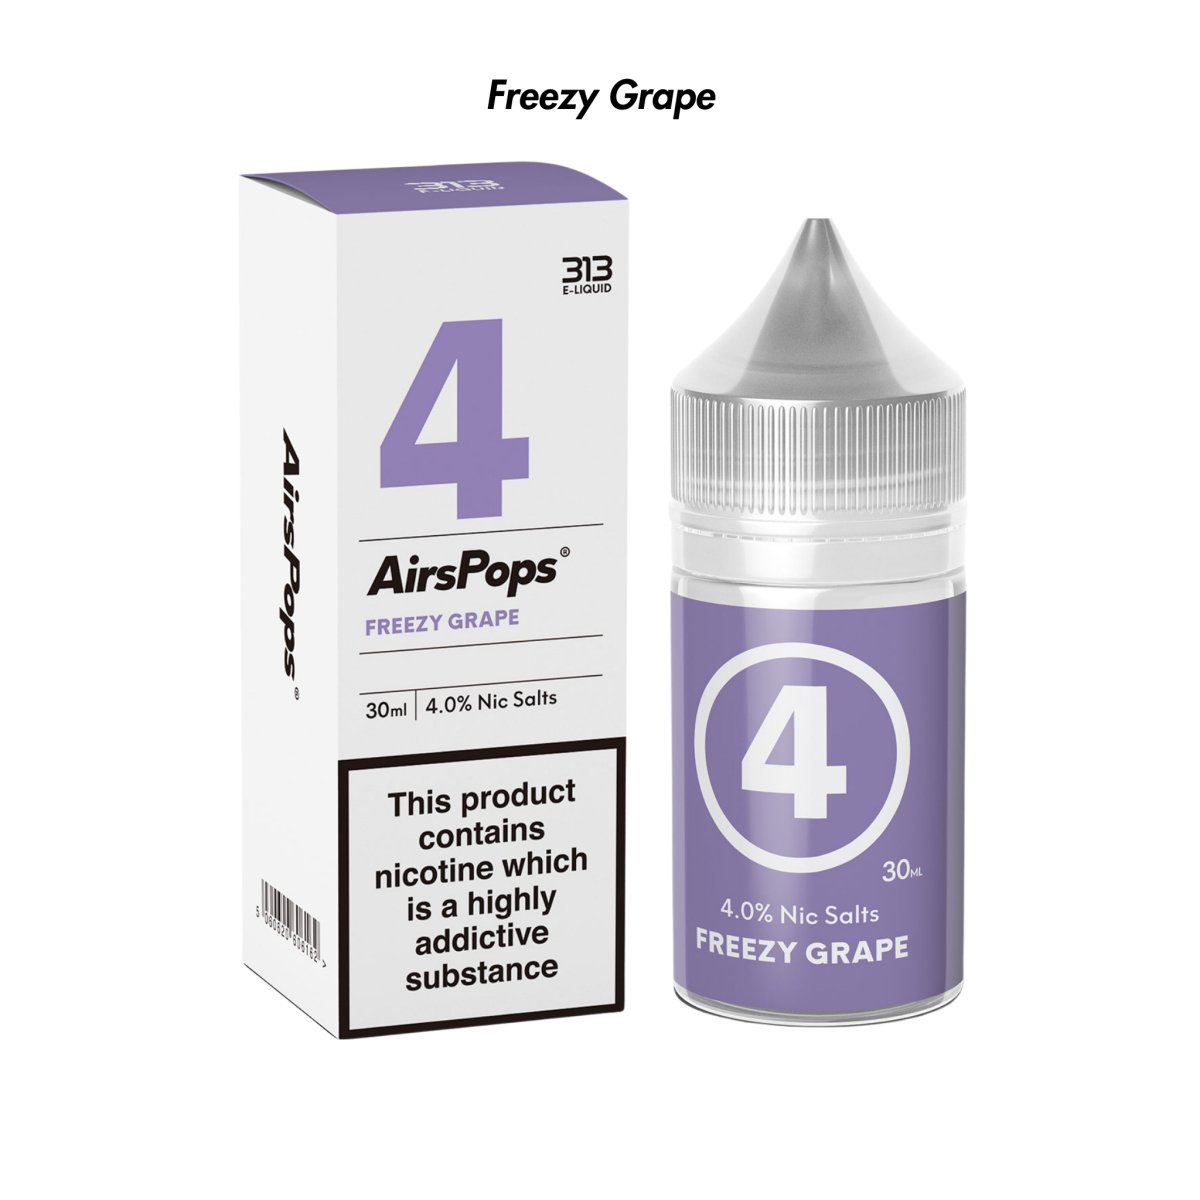 Freezy Grape 313 AirsPops E-Liquid 19mg from The Smoke Organic Store with Fast Delivery in South Africa